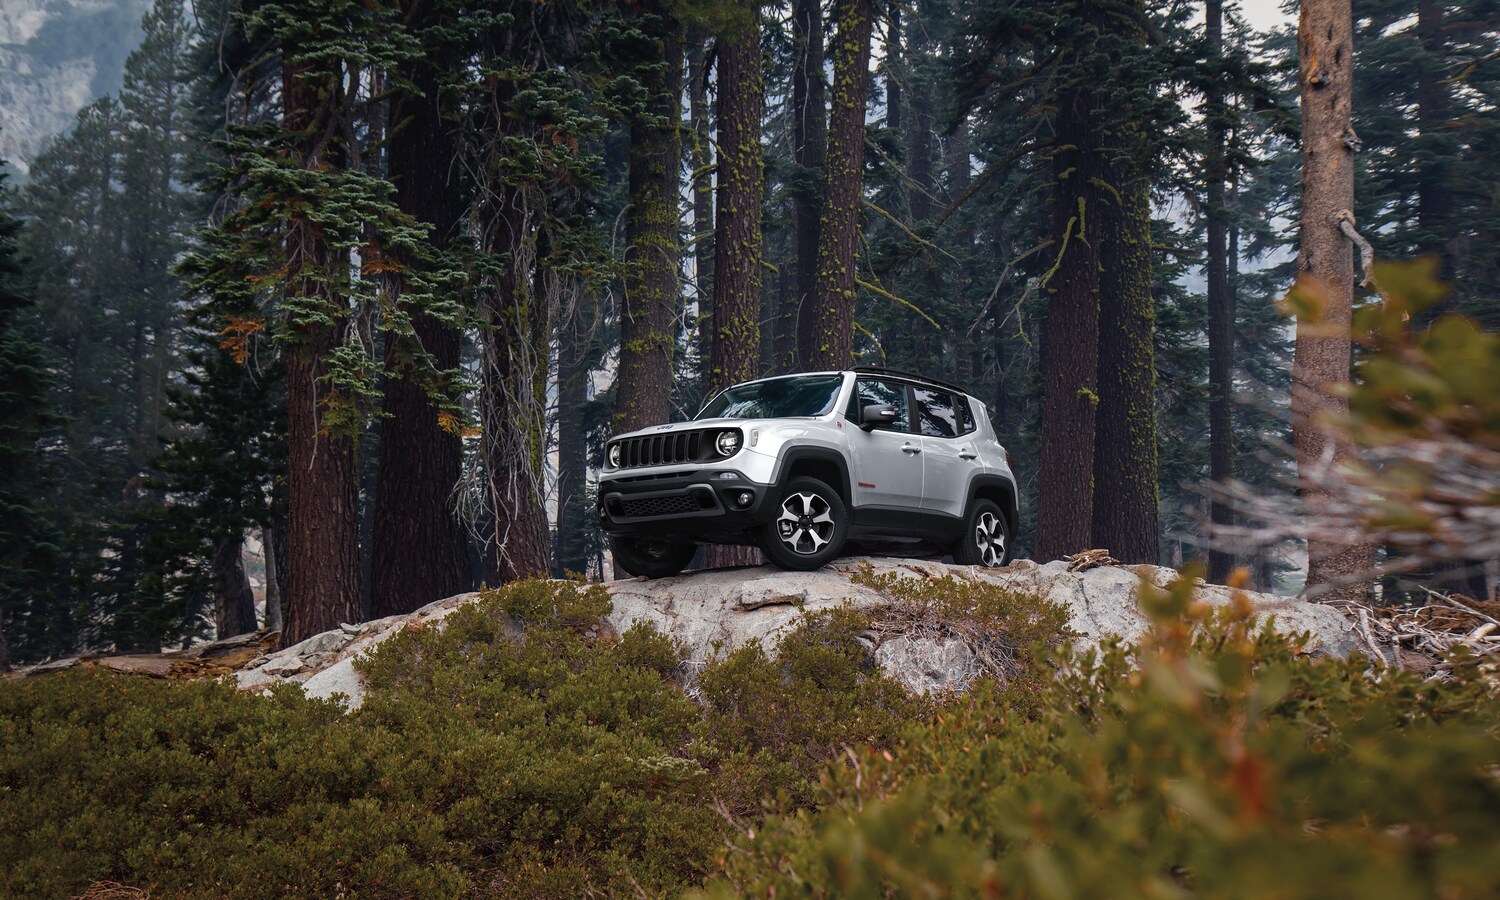 silver Jeep Renegade SUV parked up on a hill surrounded by forest trees